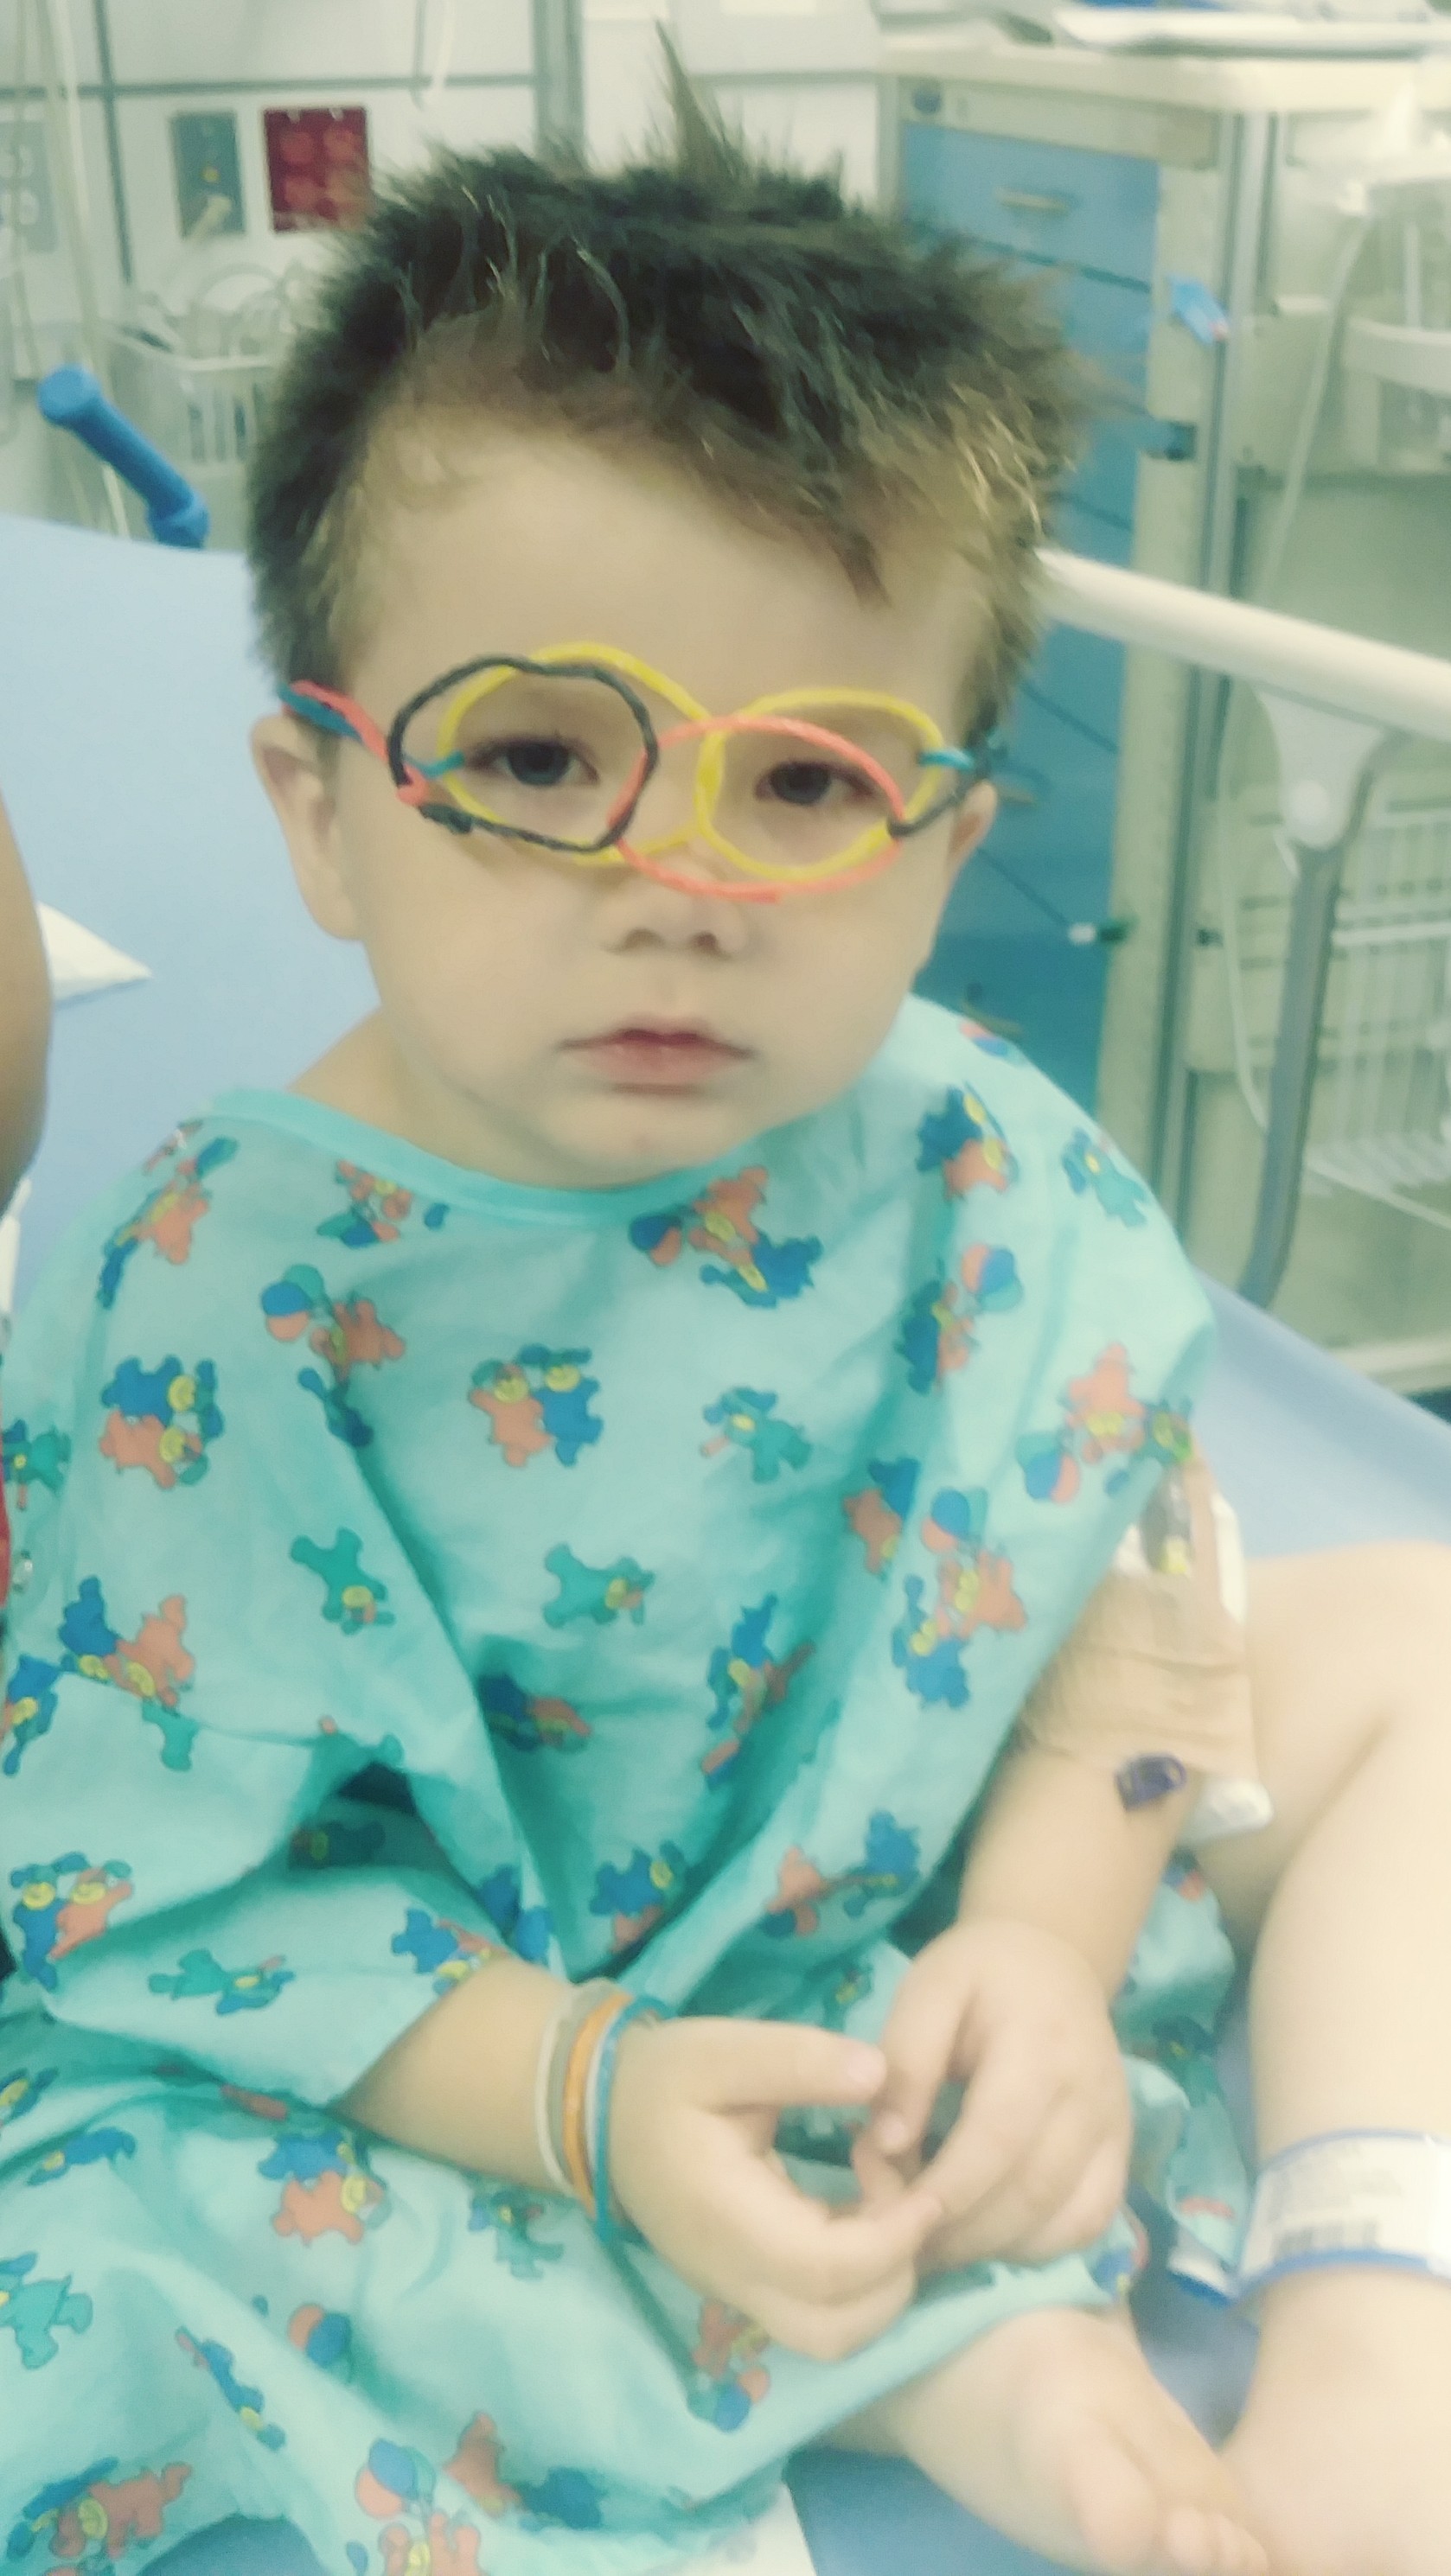 Julian in the er wearing silly glasses